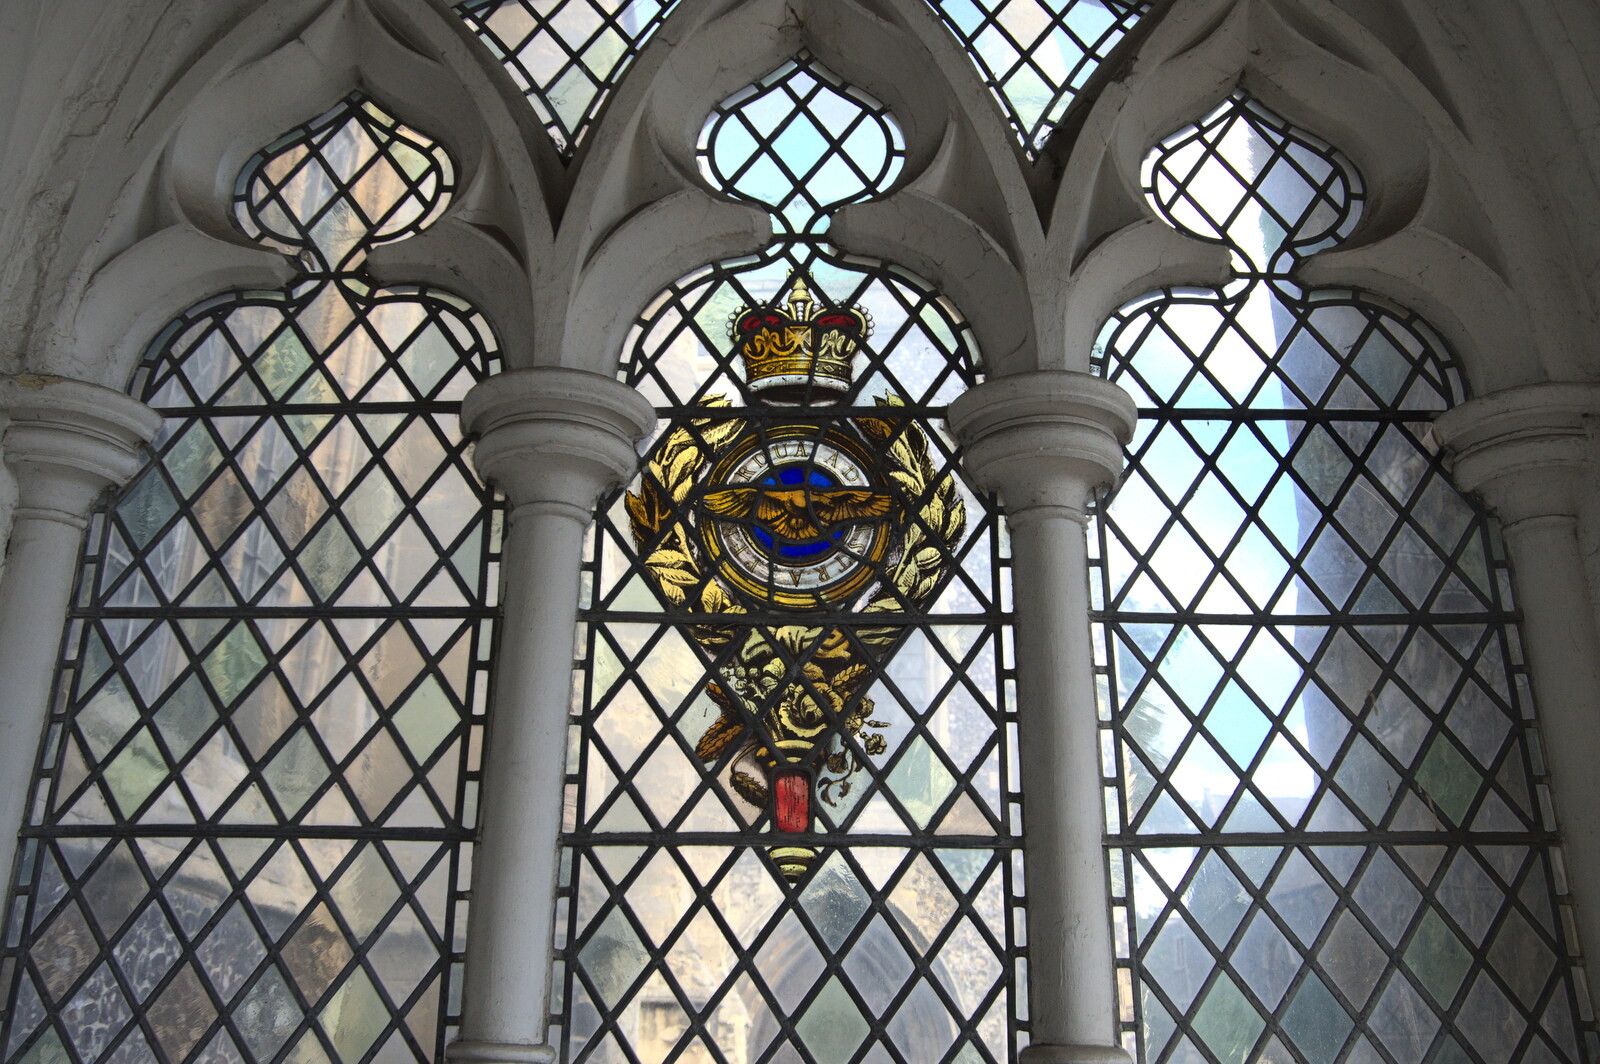 The RAF motto and crest in stained glass from Faded Seaside Glamour: A Weekend in Great Yarmouth, Norfolk - 29th May 2022